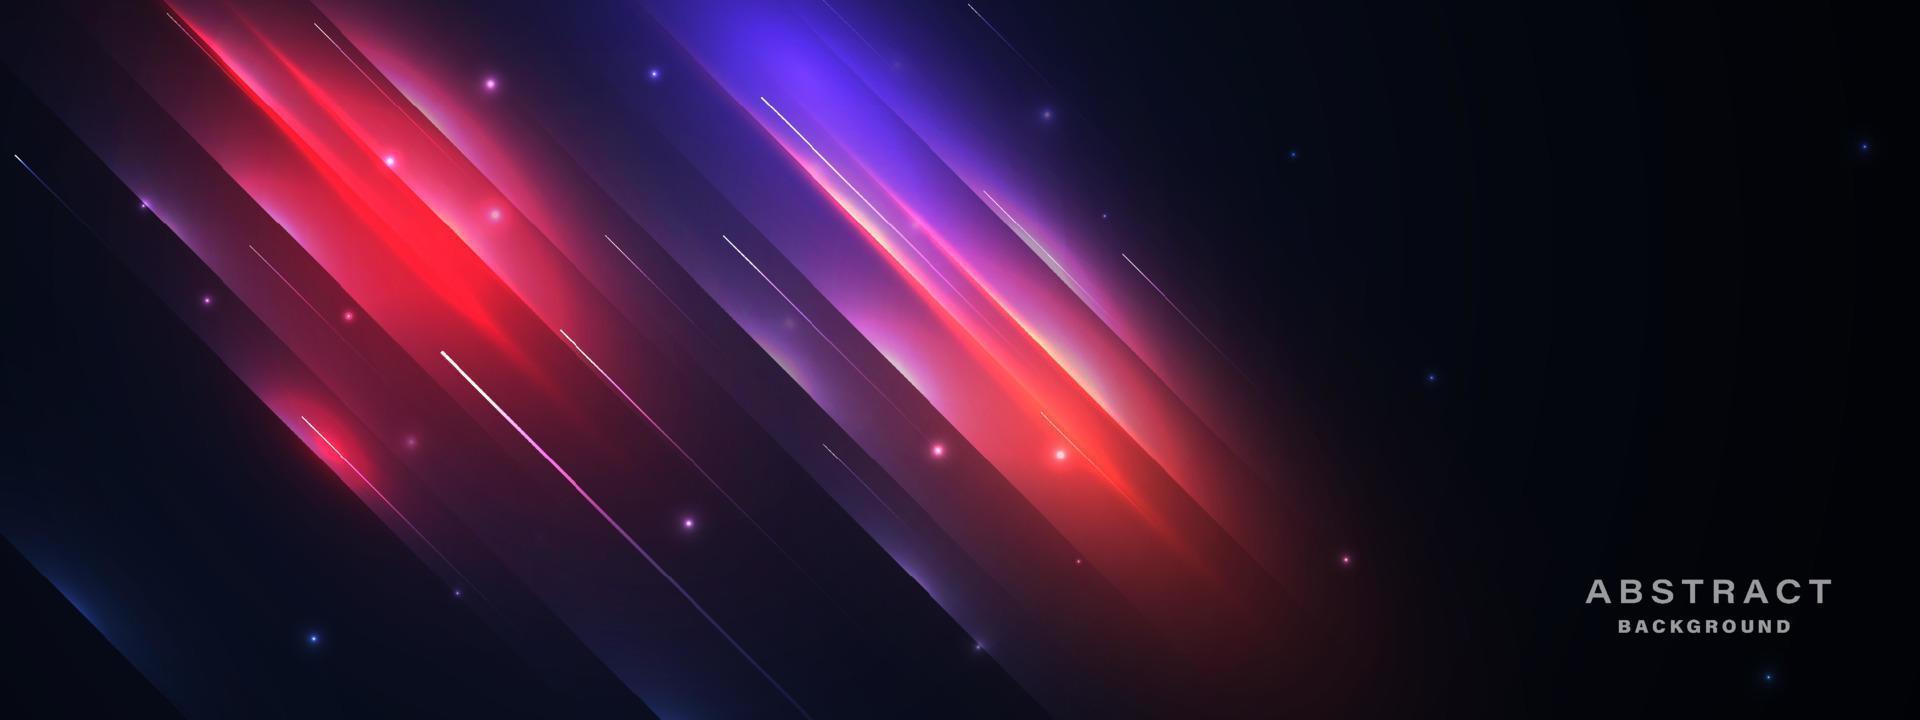 Abstract futuristic background with glowing light effect. vector